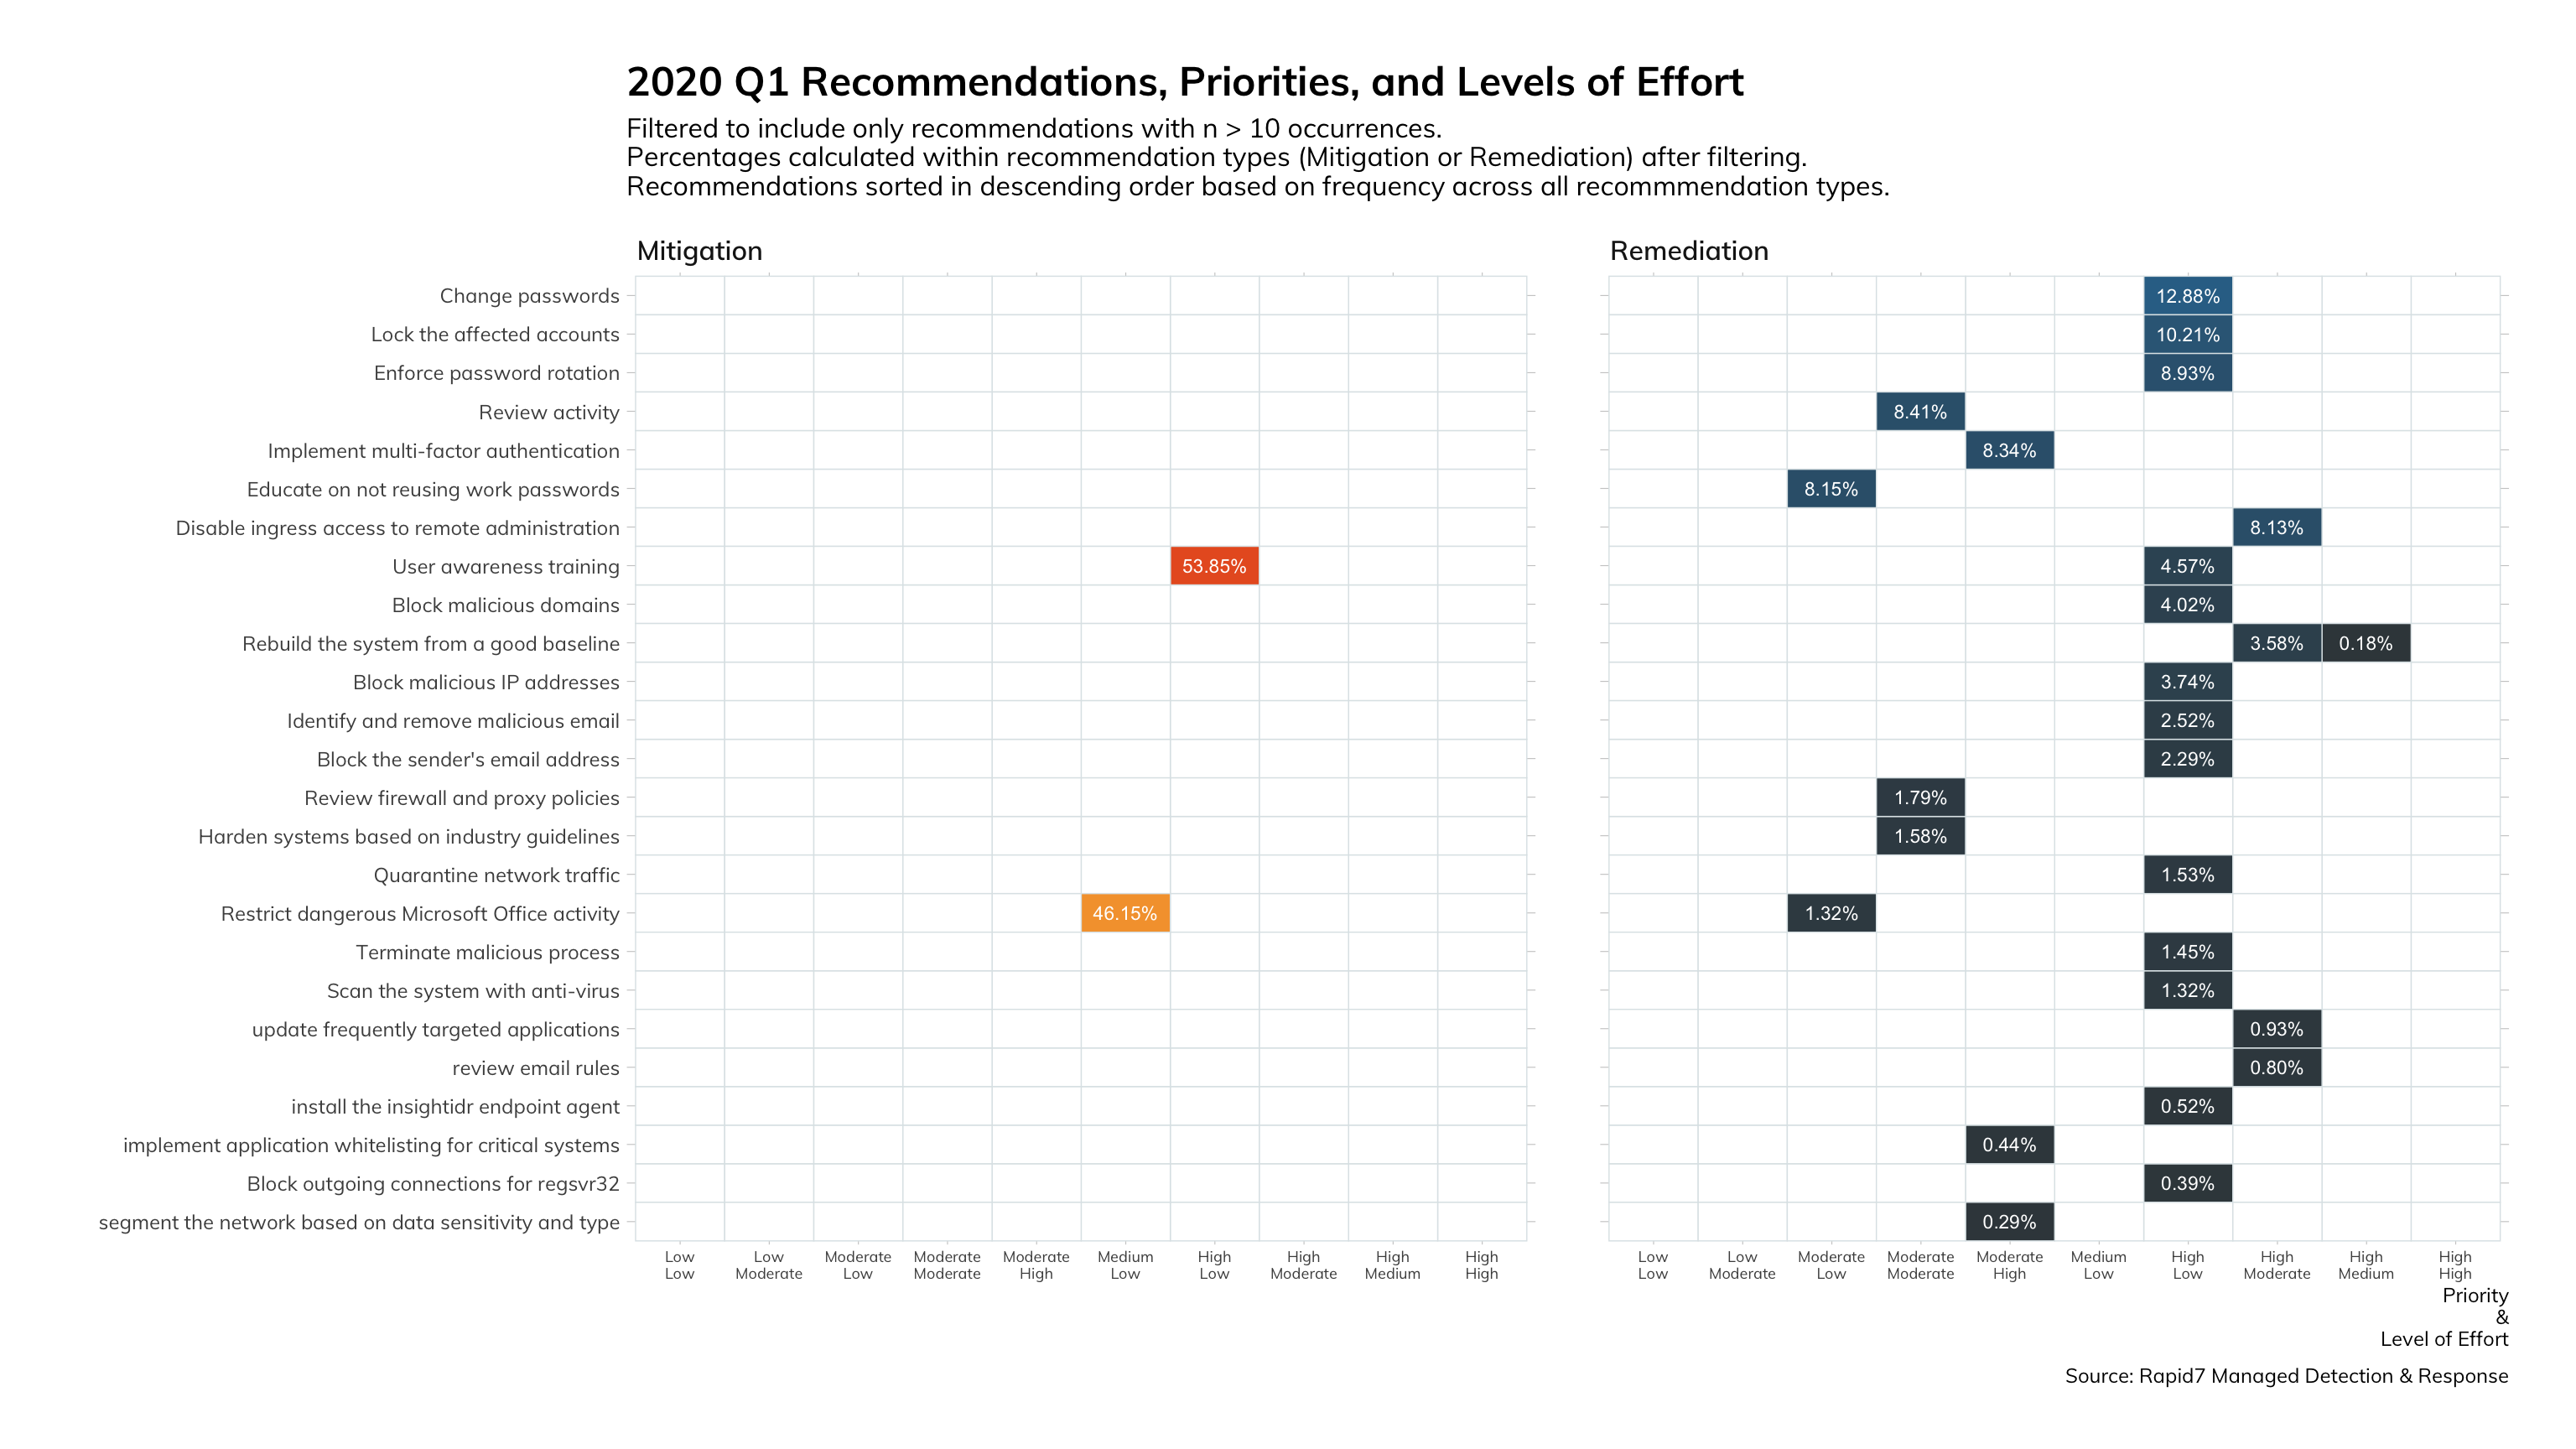 Figure 4: 2020 Q1 Recommendations, Priorities, and Levels of Effort